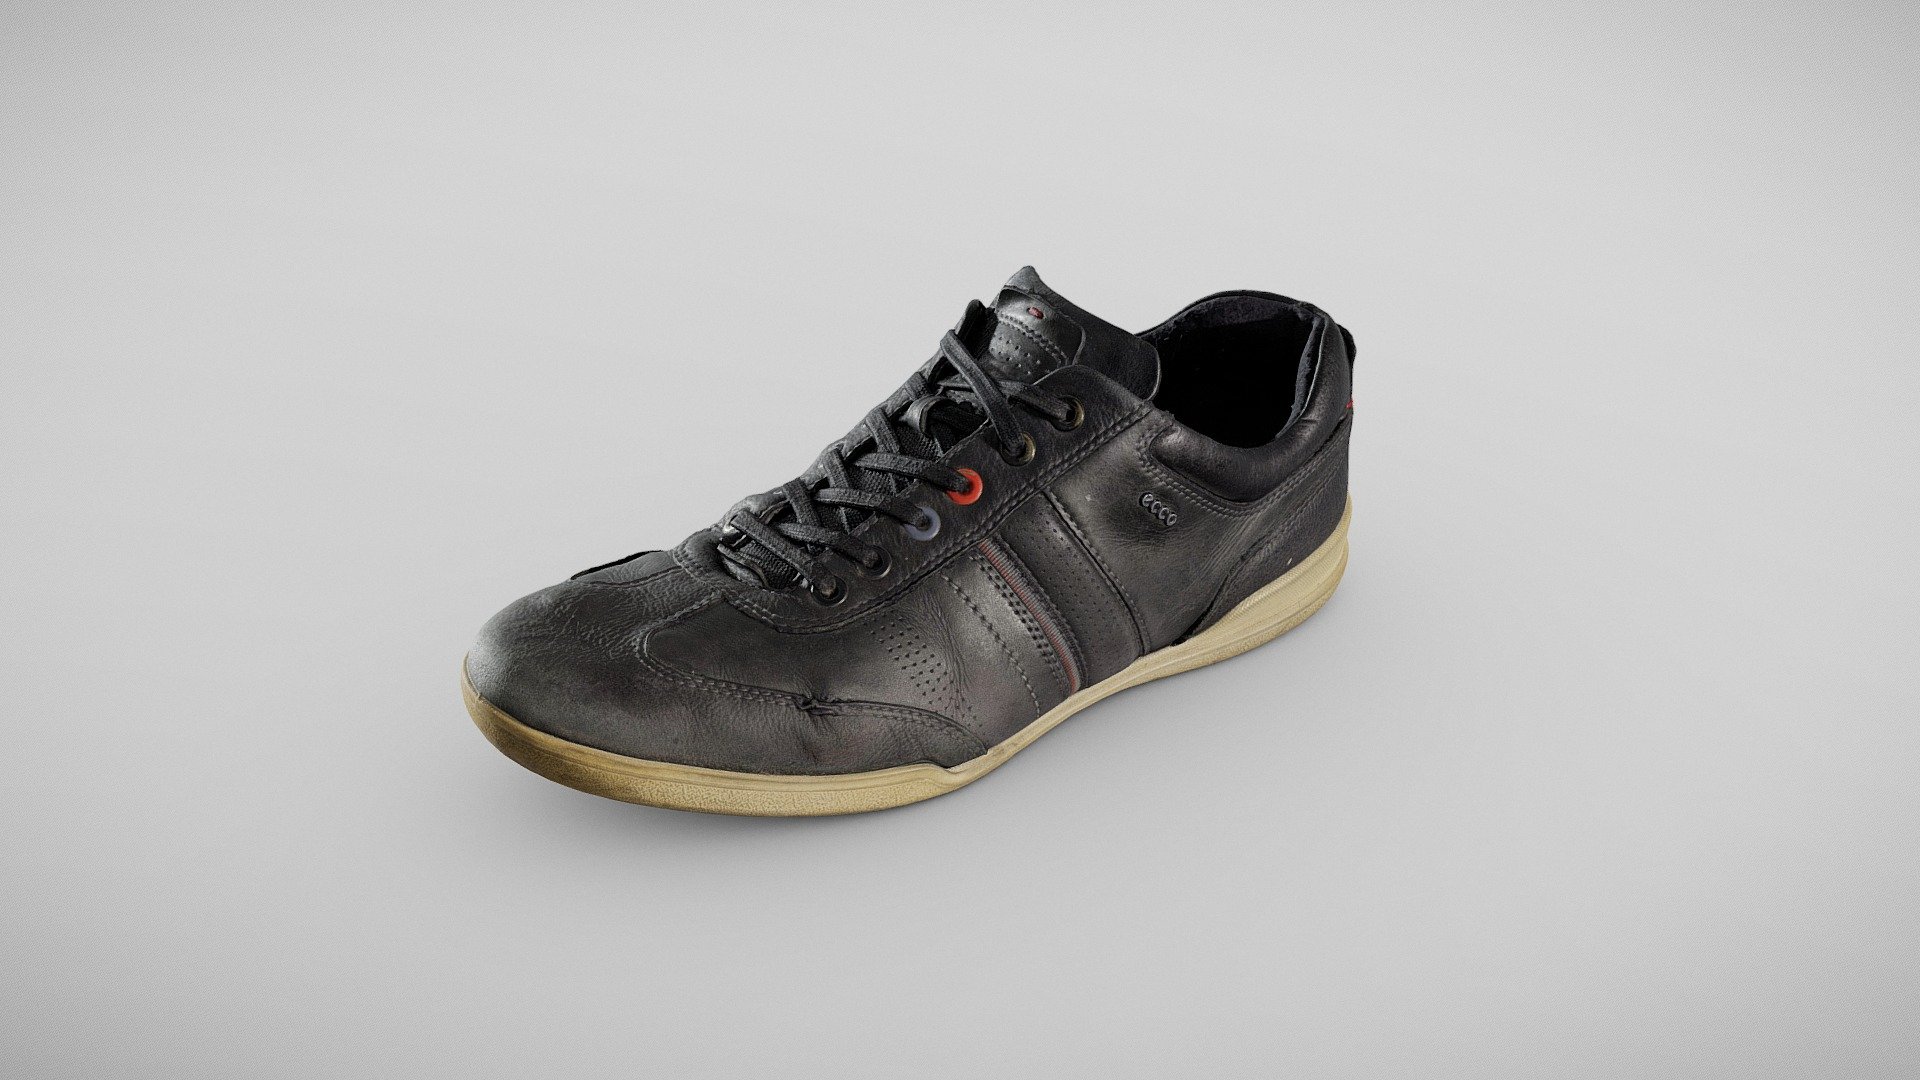 ** Old Fancy Men's Ecco Shoe **

Hard to find Fancy Designer's Ecco Lace-up sneaker with Orange and Gray accents

29.5 x 10.8 x 11.8 cm (106 micrometers per texel @ 4k)

Scanned using advanced technology developed by inciprocal Inc. that enables highly photo-realistic reproduction of real-world products in virtual environments. Our hardware and software technology combines advanced photometry, structured light, photogrammtery and light fields to capture and generate accurate material representations from tens of thousands of images targeting real-time and offline path-traced PBR compatible renderers.

Zip file includes low-poly OBJ mesh (in meters) with a set of 4k PBR textures compressed with lossless JPEG (no chroma sub-sampling).

ArtStation @ https://www.artstation.com/artwork/qQ2P3y

 - Old Fancy Ecco - Buy Royalty Free 3D model by inciprocal (@inciprocal.com) 3d model